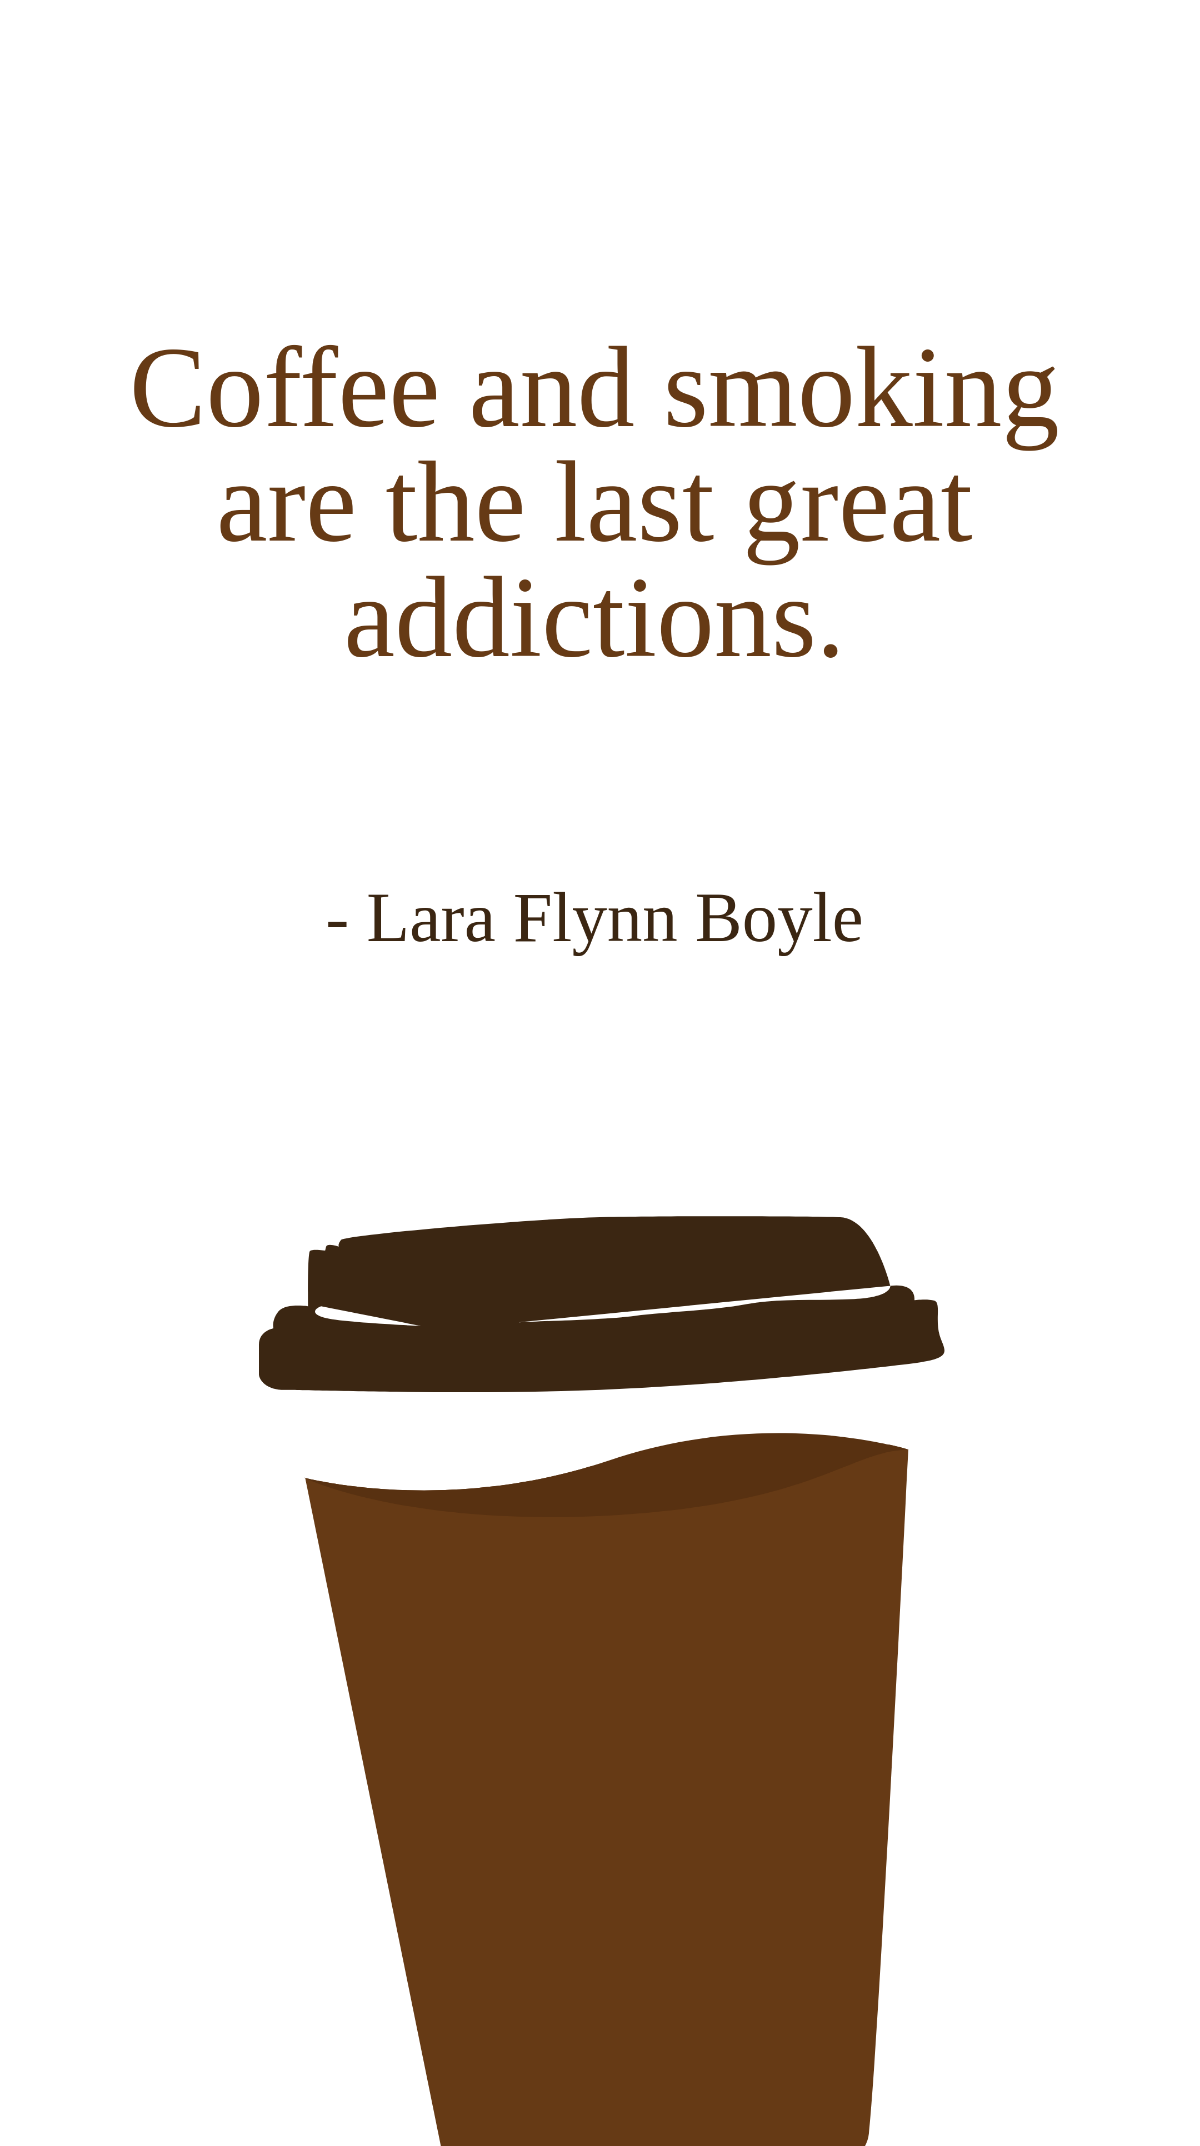 Lara Flynn Boyle - Coffee and smoking are the last great addictions. Template